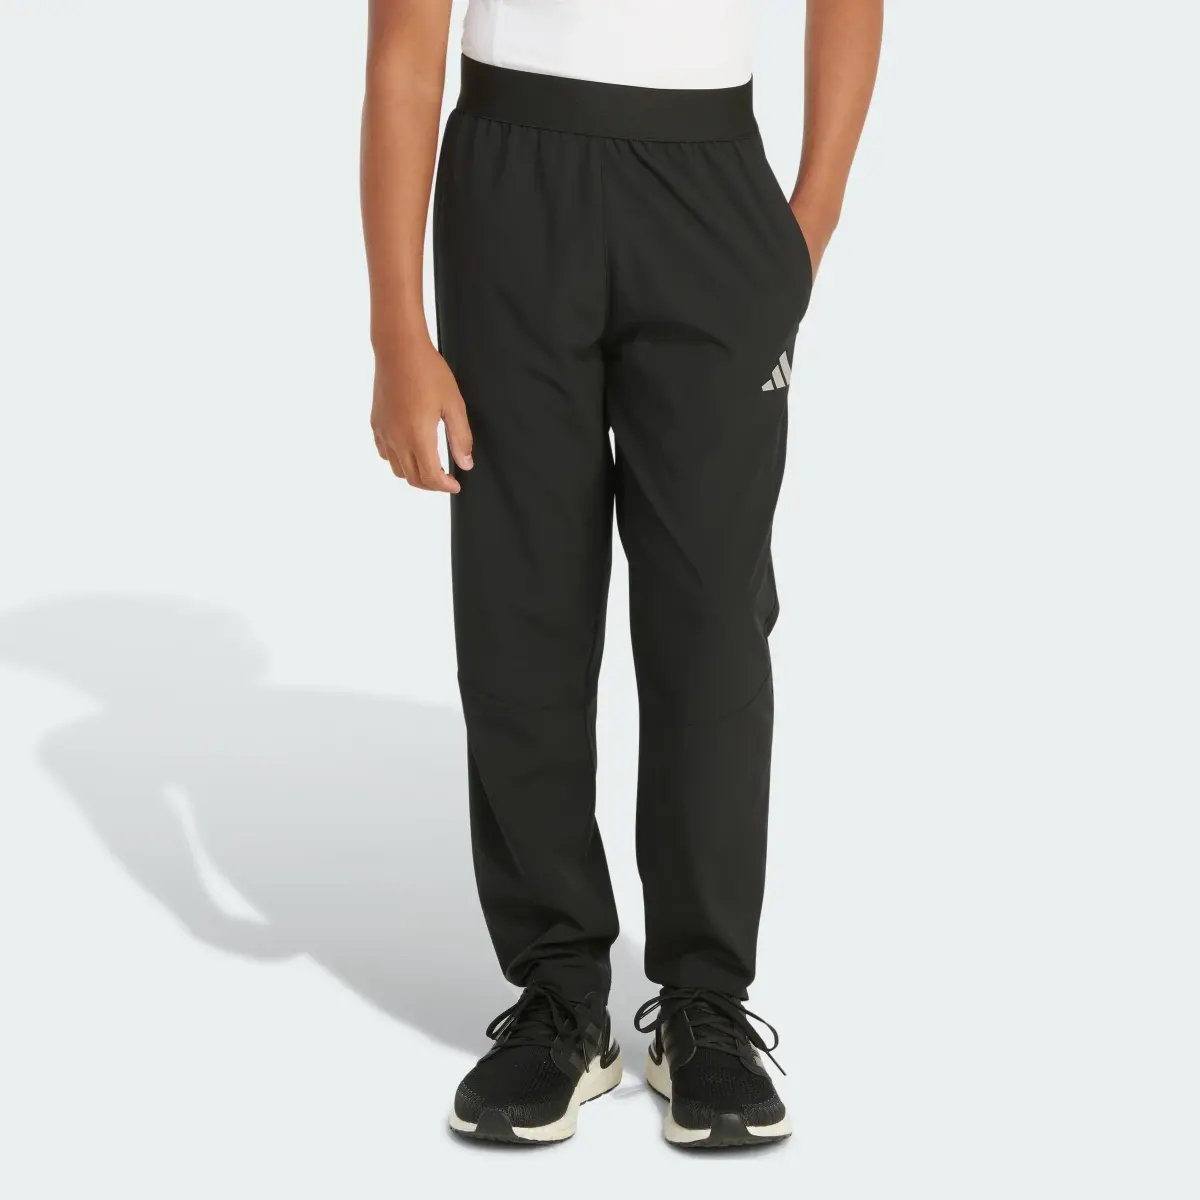 Adidas Designed for Training Stretch Woven Pants. 1